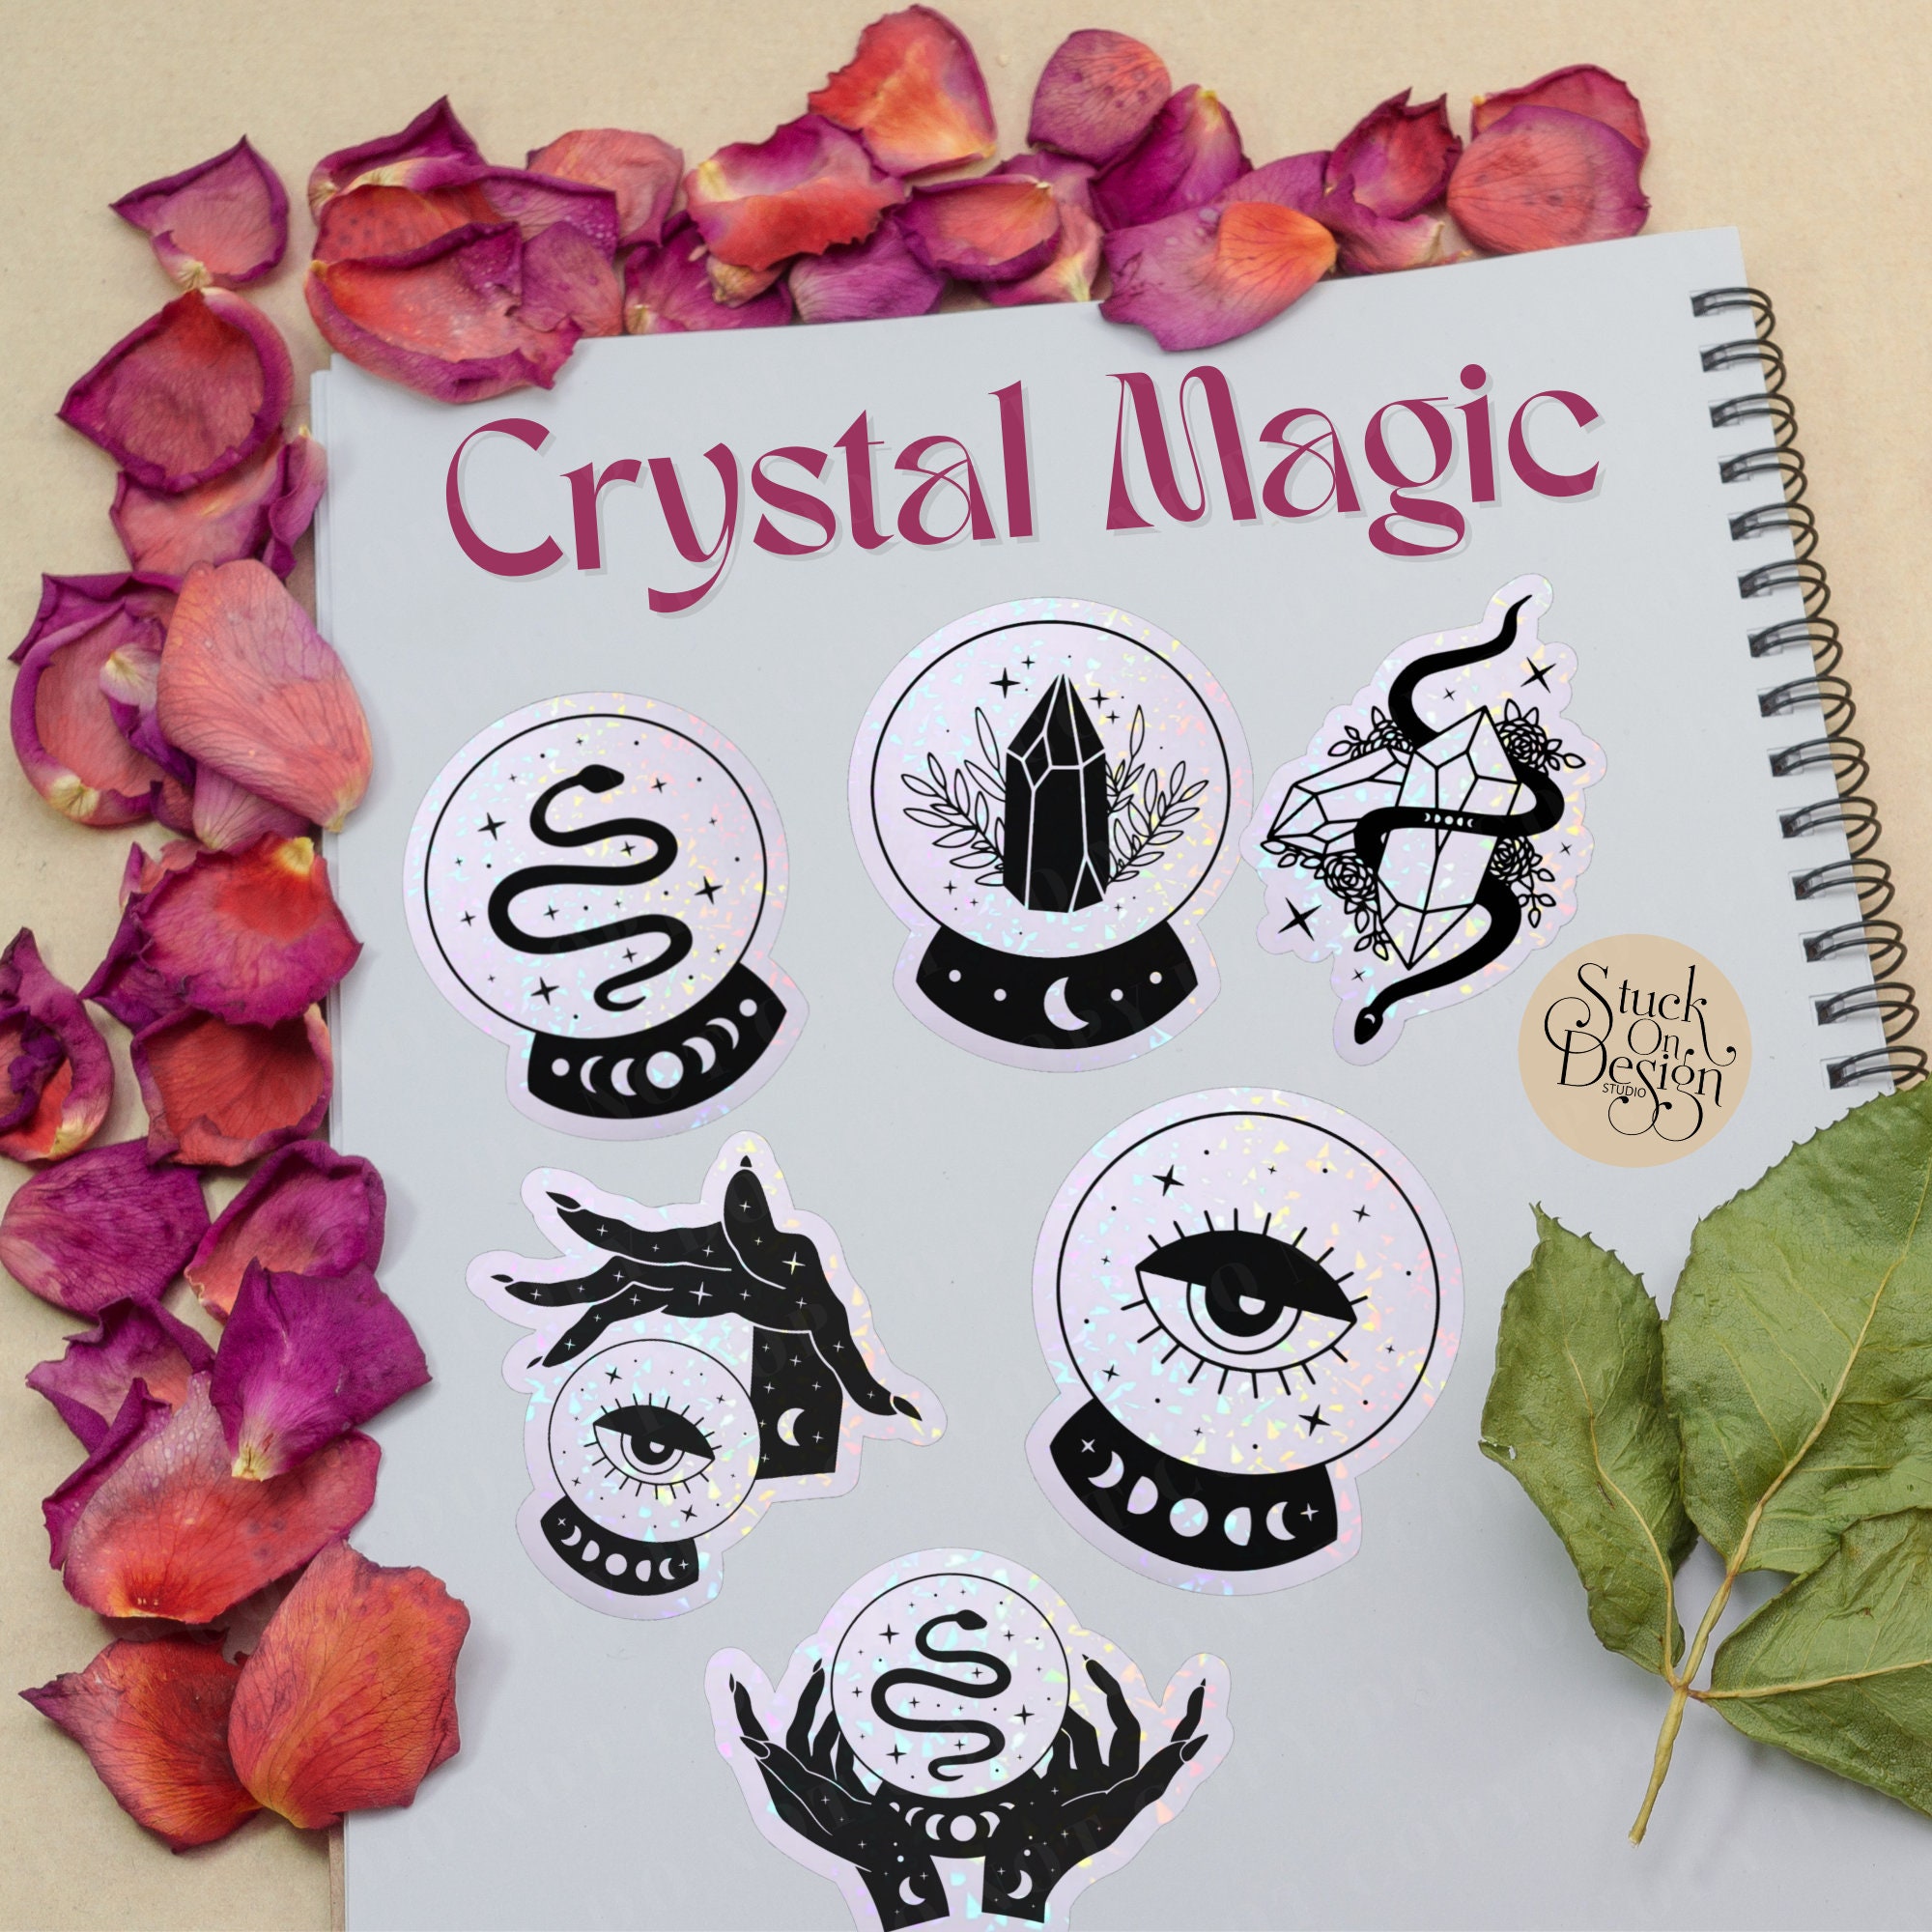 Magical Crystal Stickers Crystal Stickers Gemstone Stickers Kawaii Stickers  Vinyl Stickers Witchy Stickers 8x7cm 